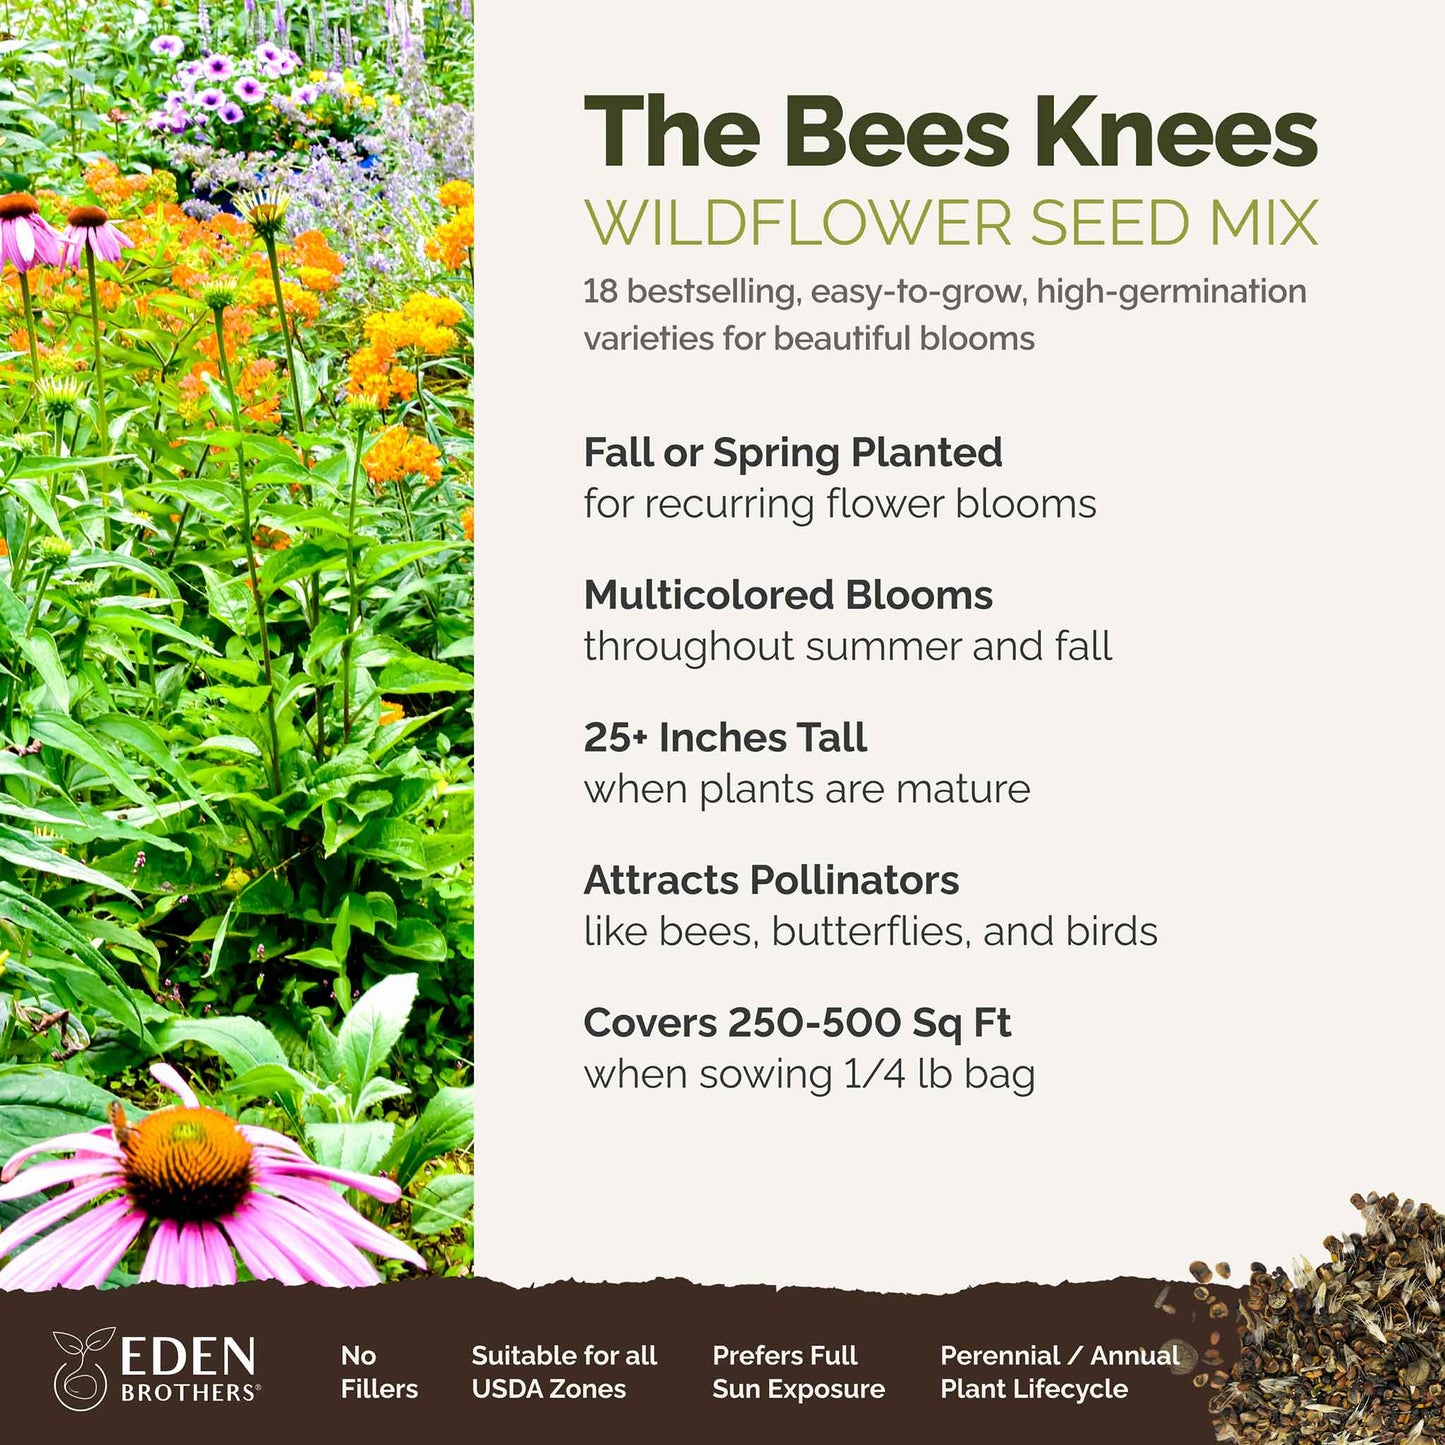 bees knees overview